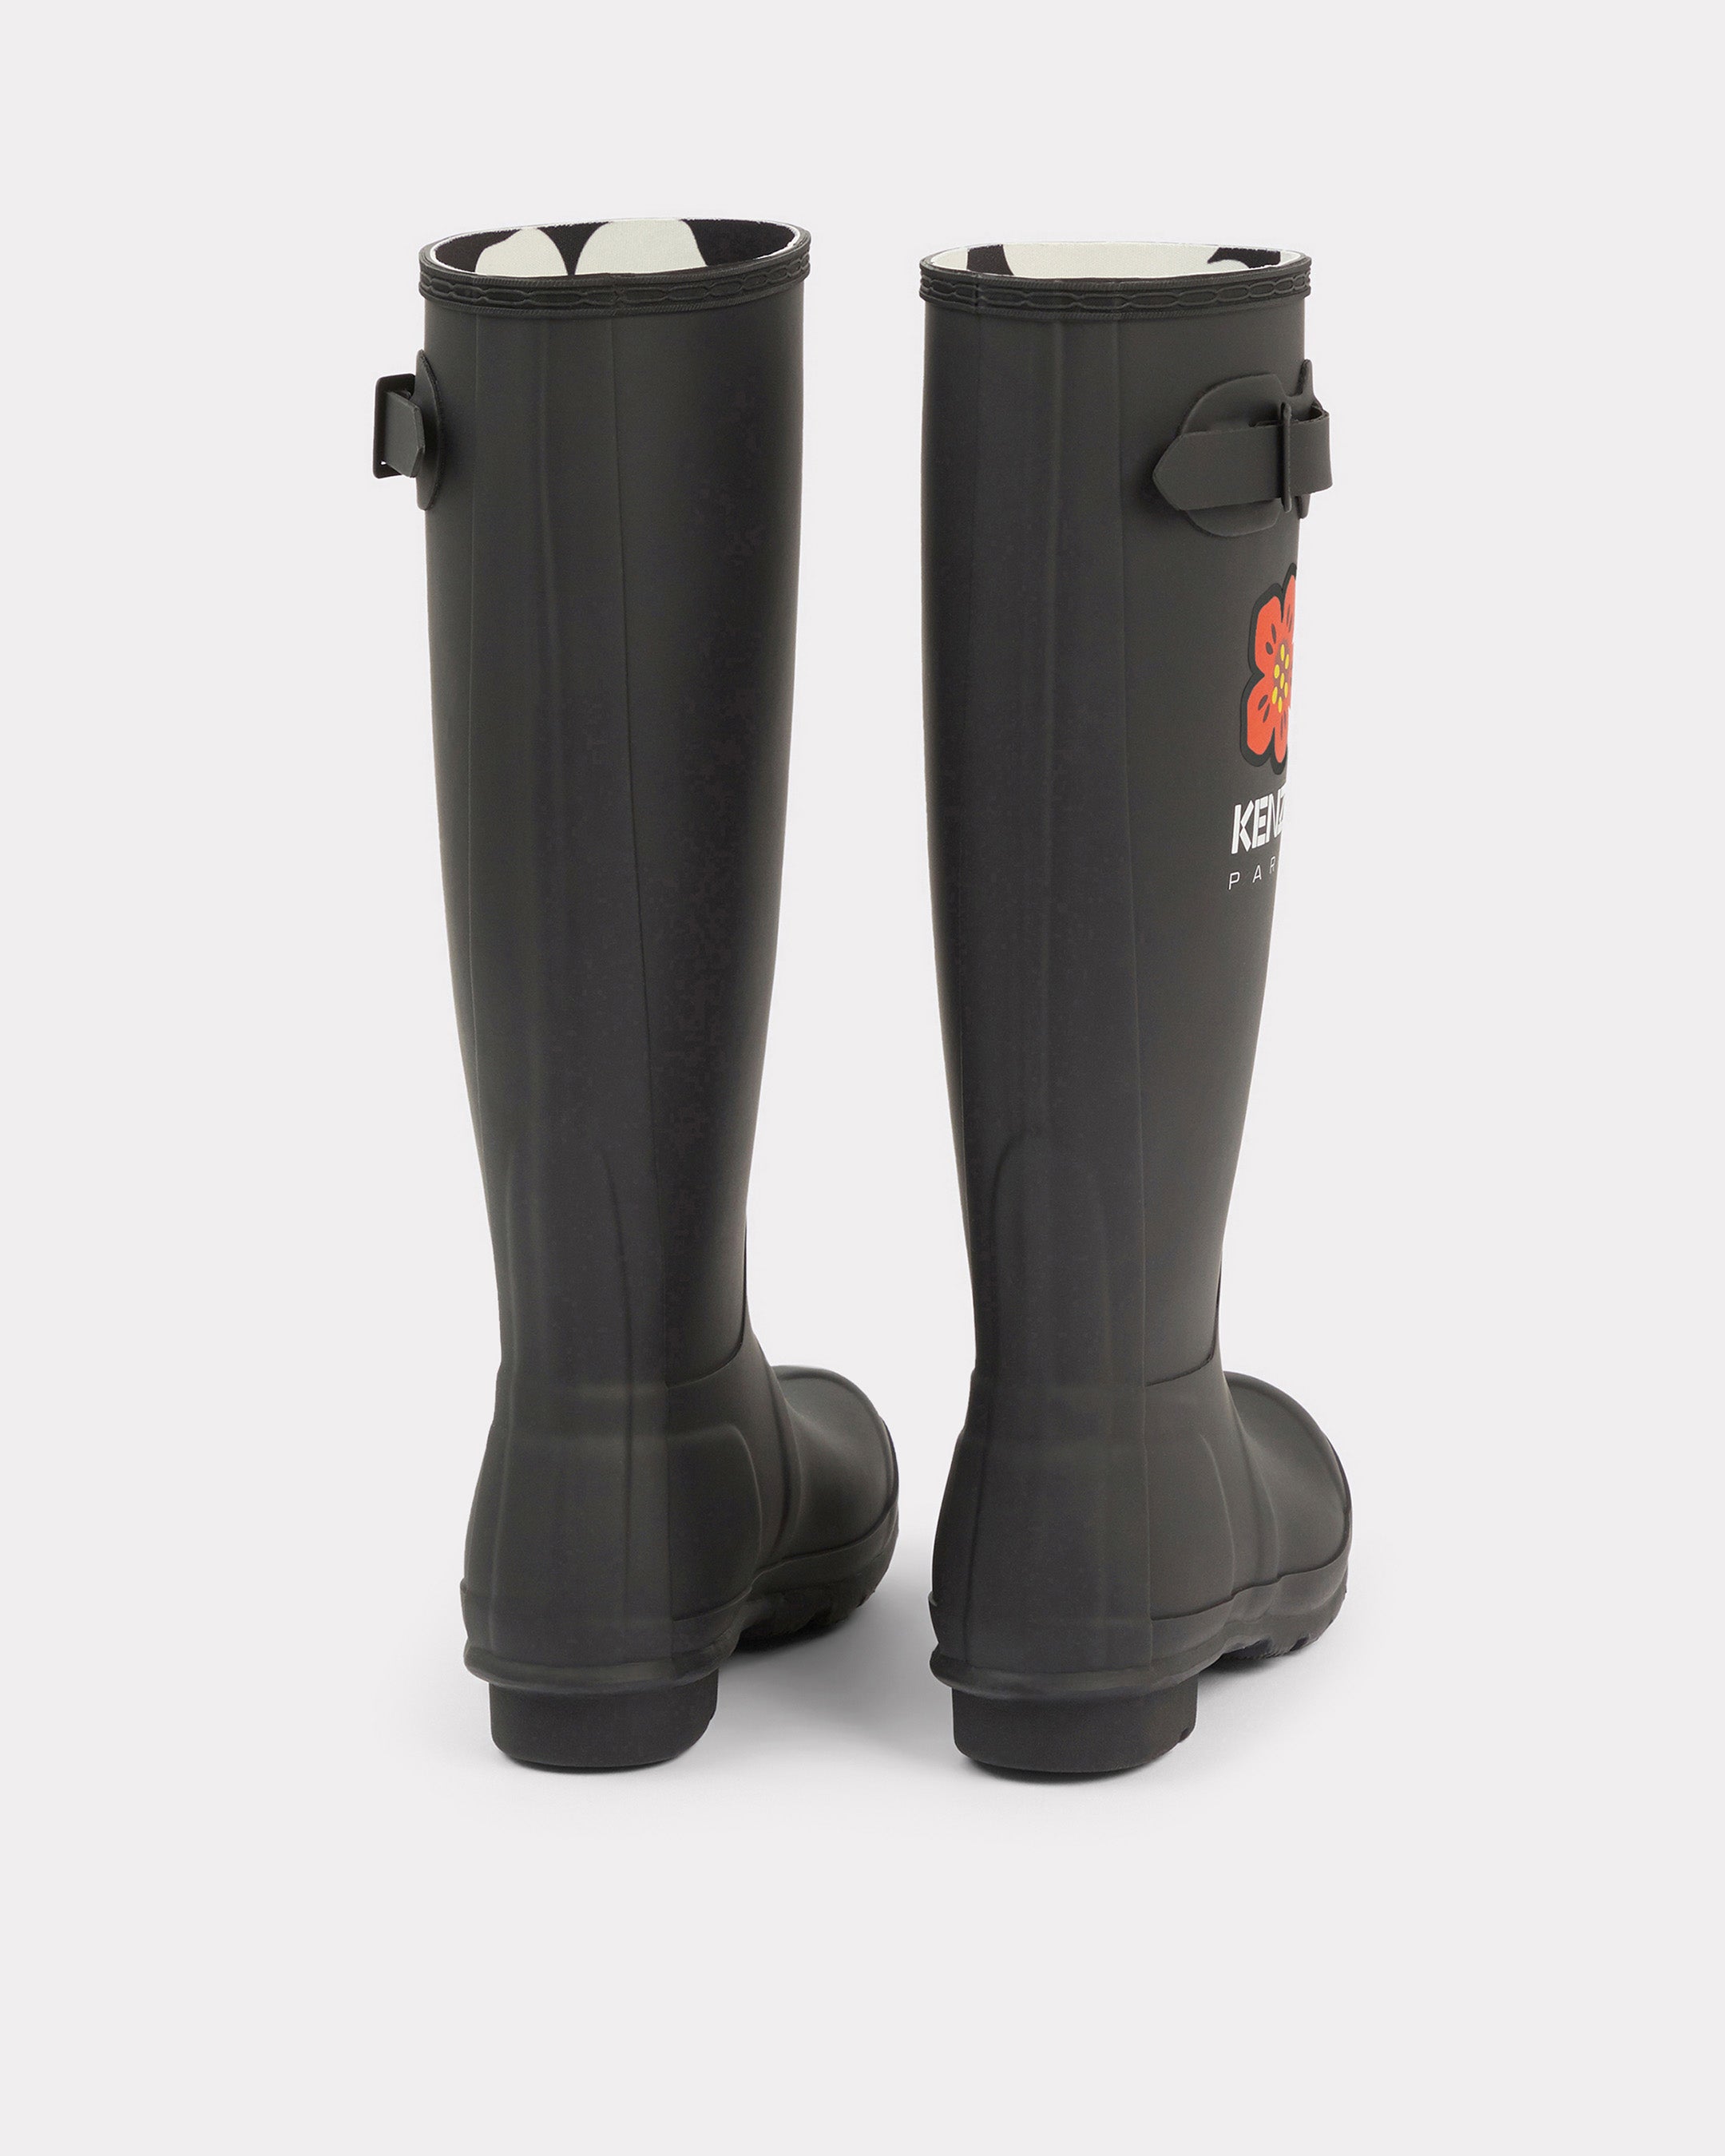 Girls' Boots & Booties, Snow, Rain, and Riding Boots